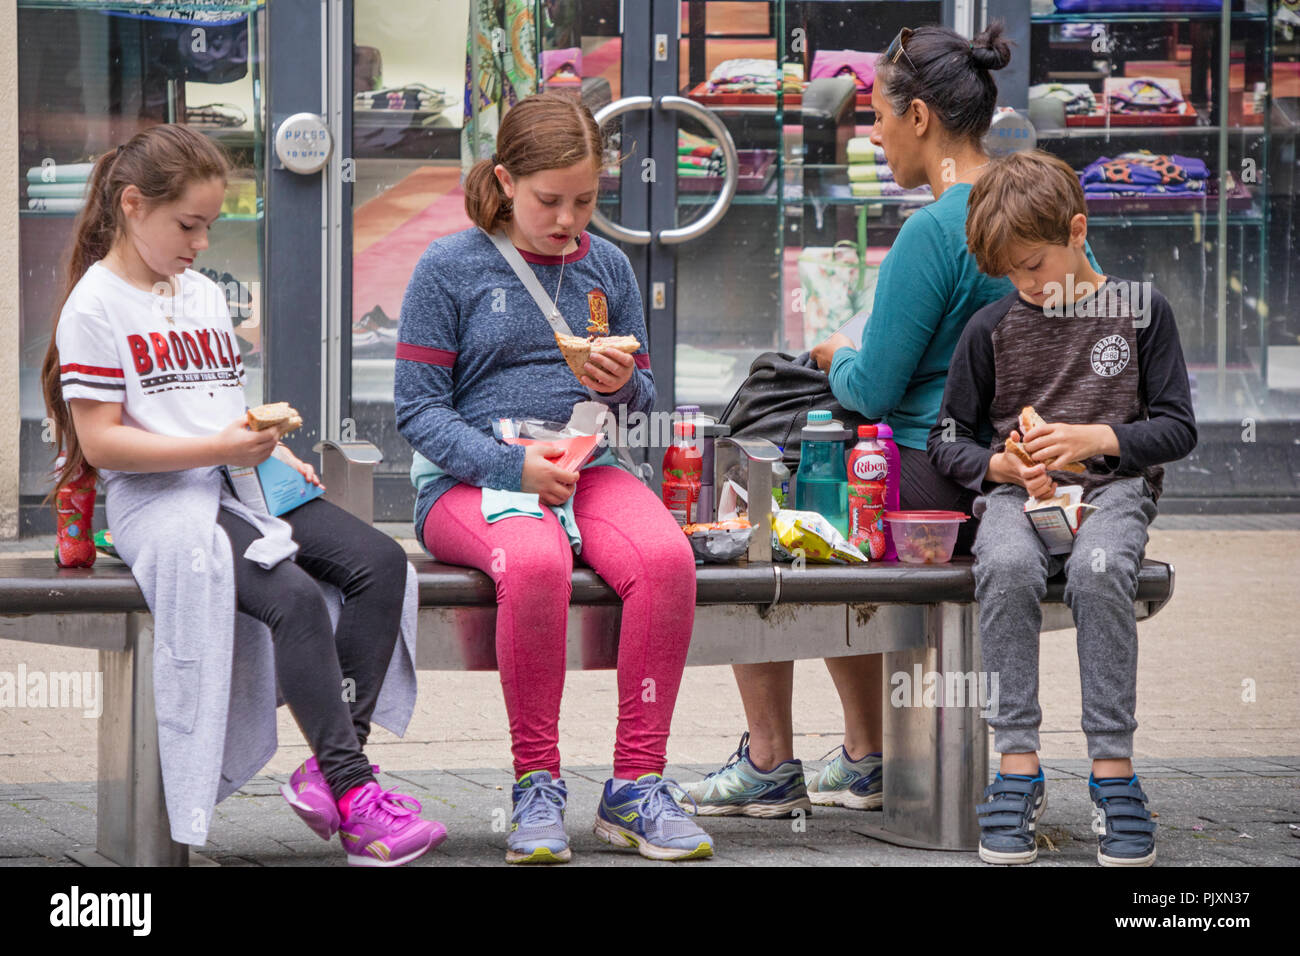 Children eating shop bought fast food while shopping in Bristol, England, UK Stock Photo